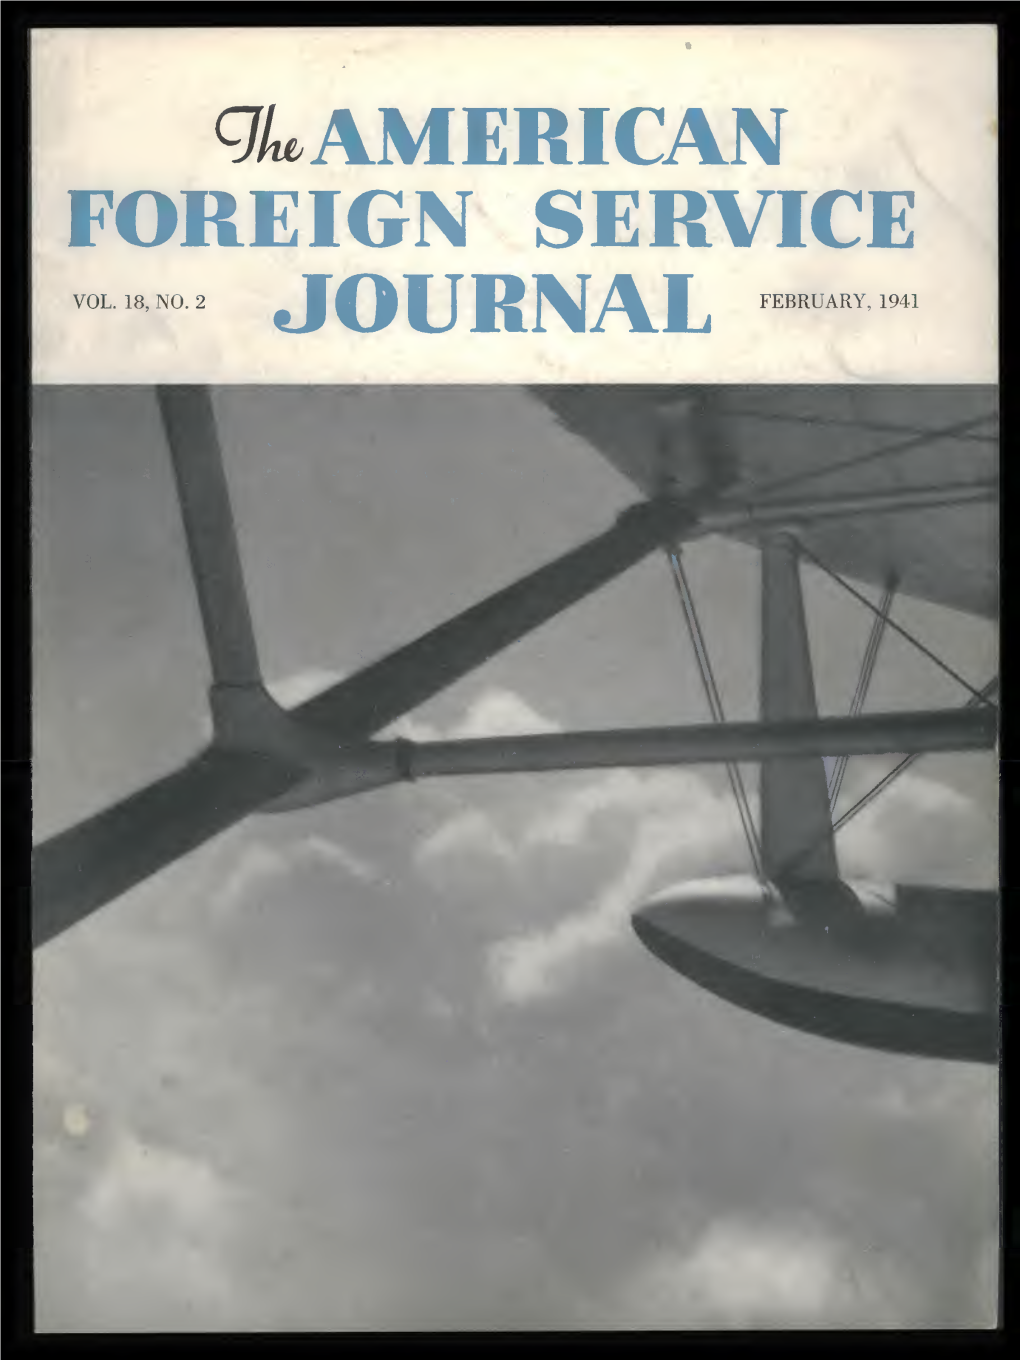 The Foreign Service Journal, February 1941